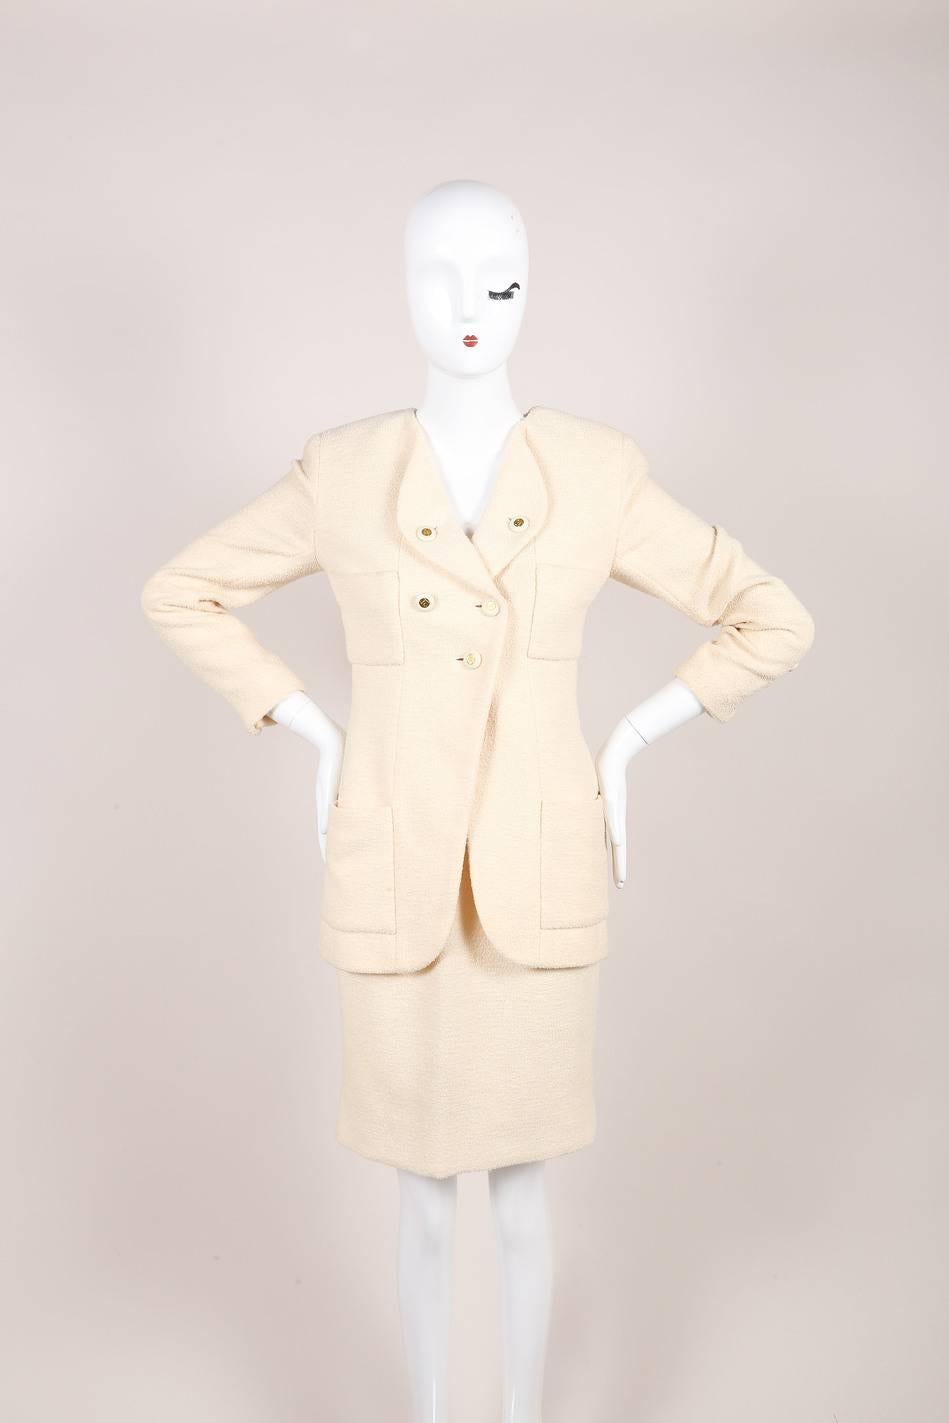 Classic and chic Chanel vintage skirt suit from the Chanel 1994 Spring Collection. Jacket: Cream tweed wool blend. Long sleeves with gold tone ‘CC’ button closures. Folded lapel with gold tone ‘CC’ button closure. Square pockets at bust and hips.